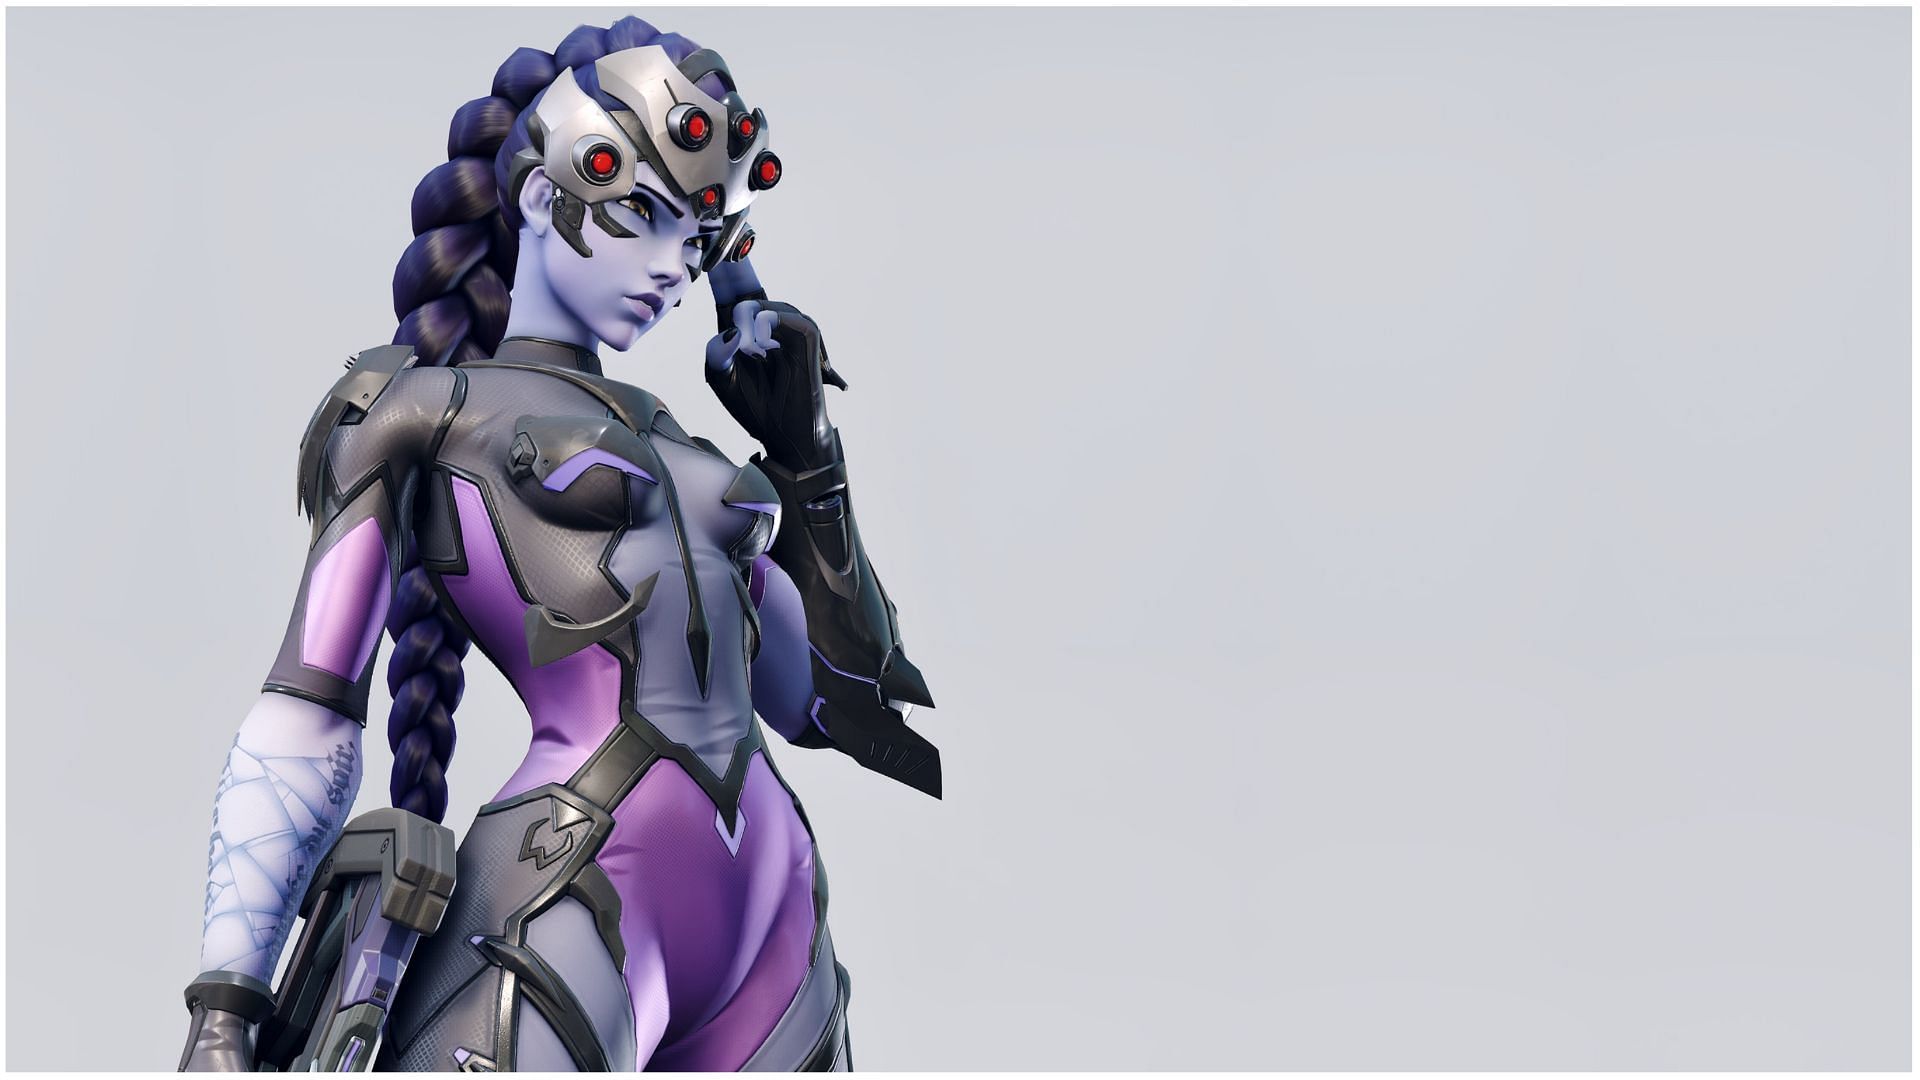 How to unlock Widowmaker in Overwatch 2: Abilities, class, and more explained